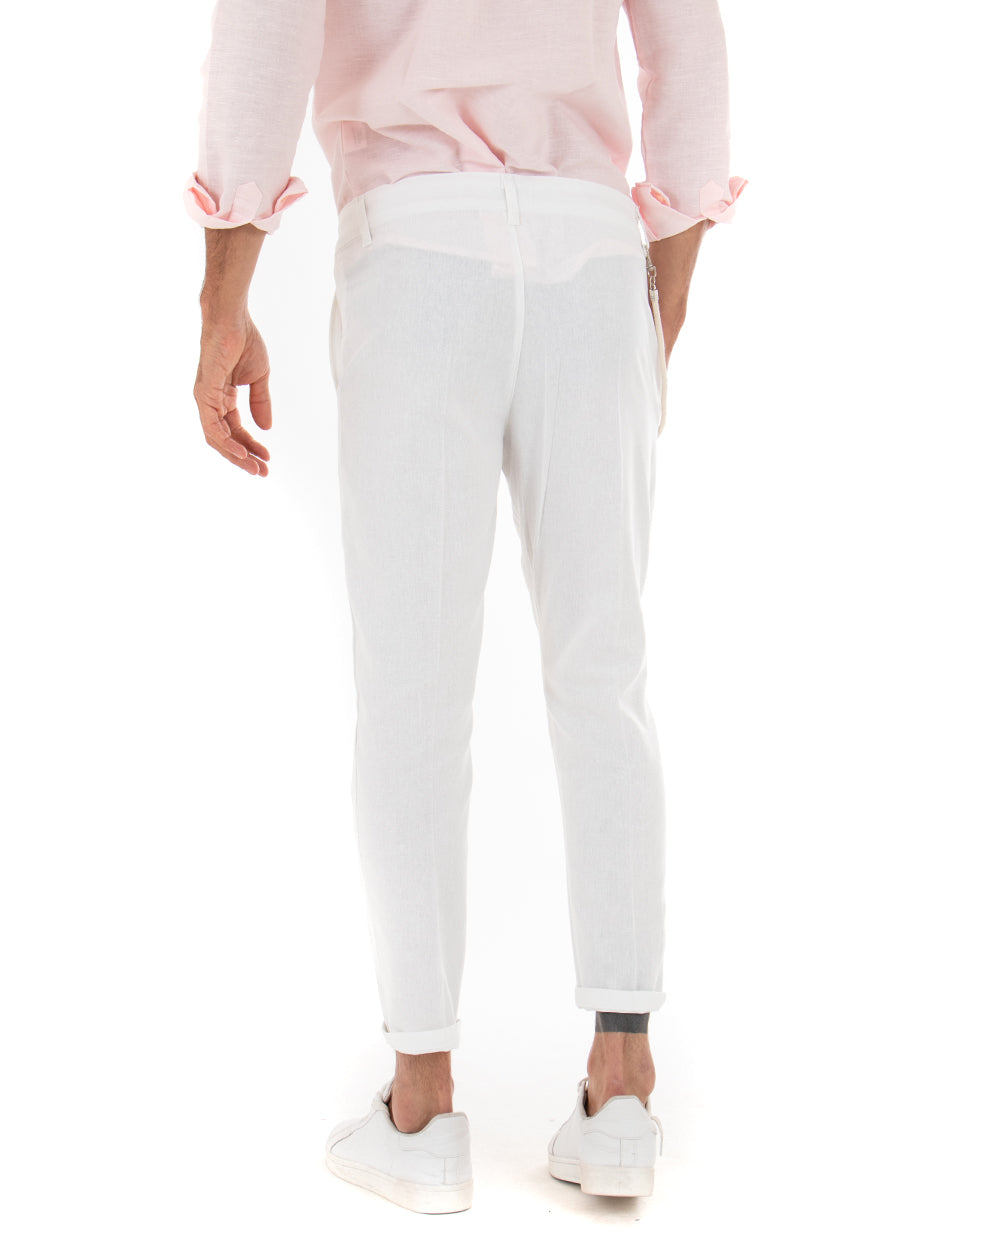 Men's Linen Trousers Elongated Button Classic Solid Color White Elegant GIOSAL